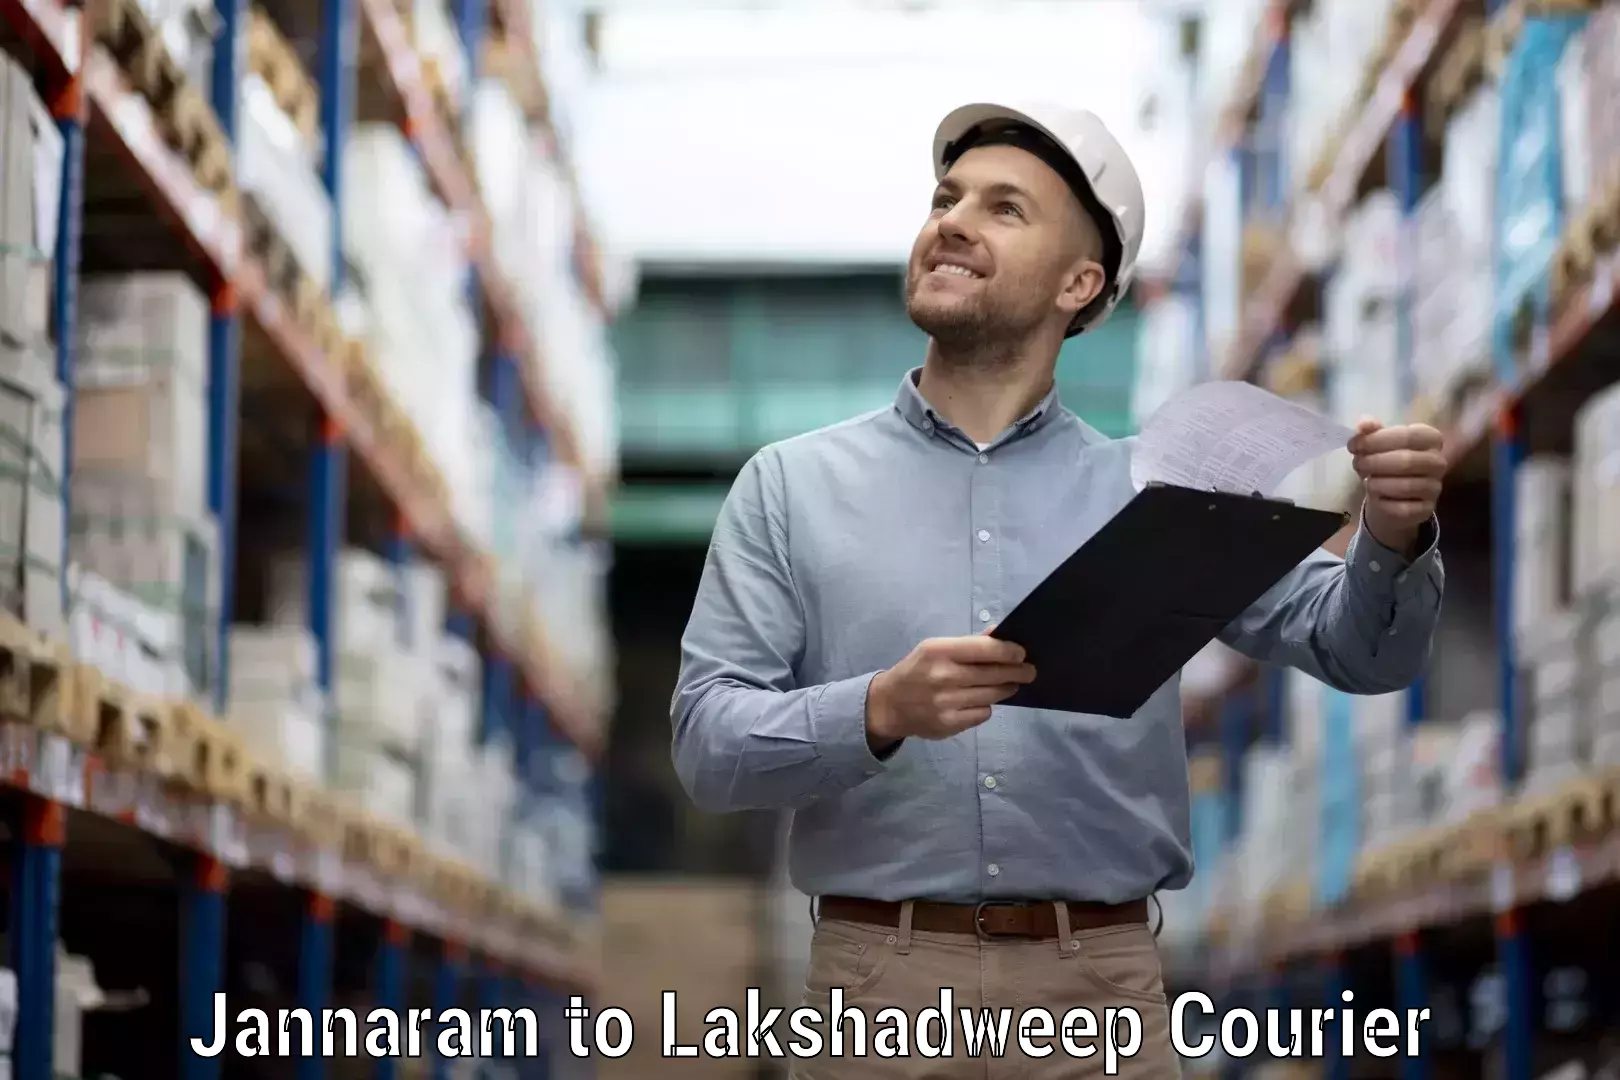 Online courier booking Jannaram to Lakshadweep